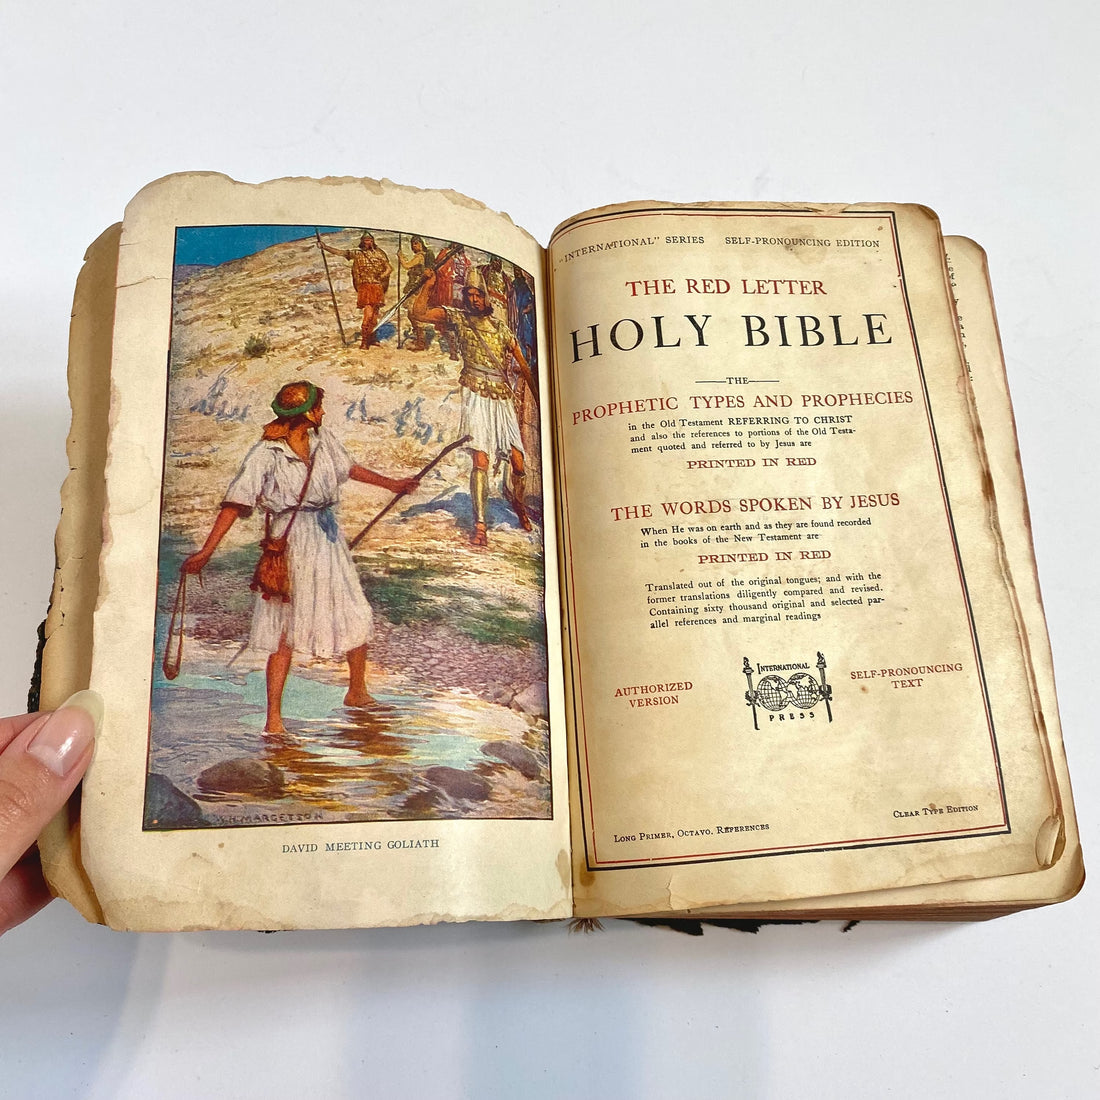 The History of Illustrated Vintage Bibles